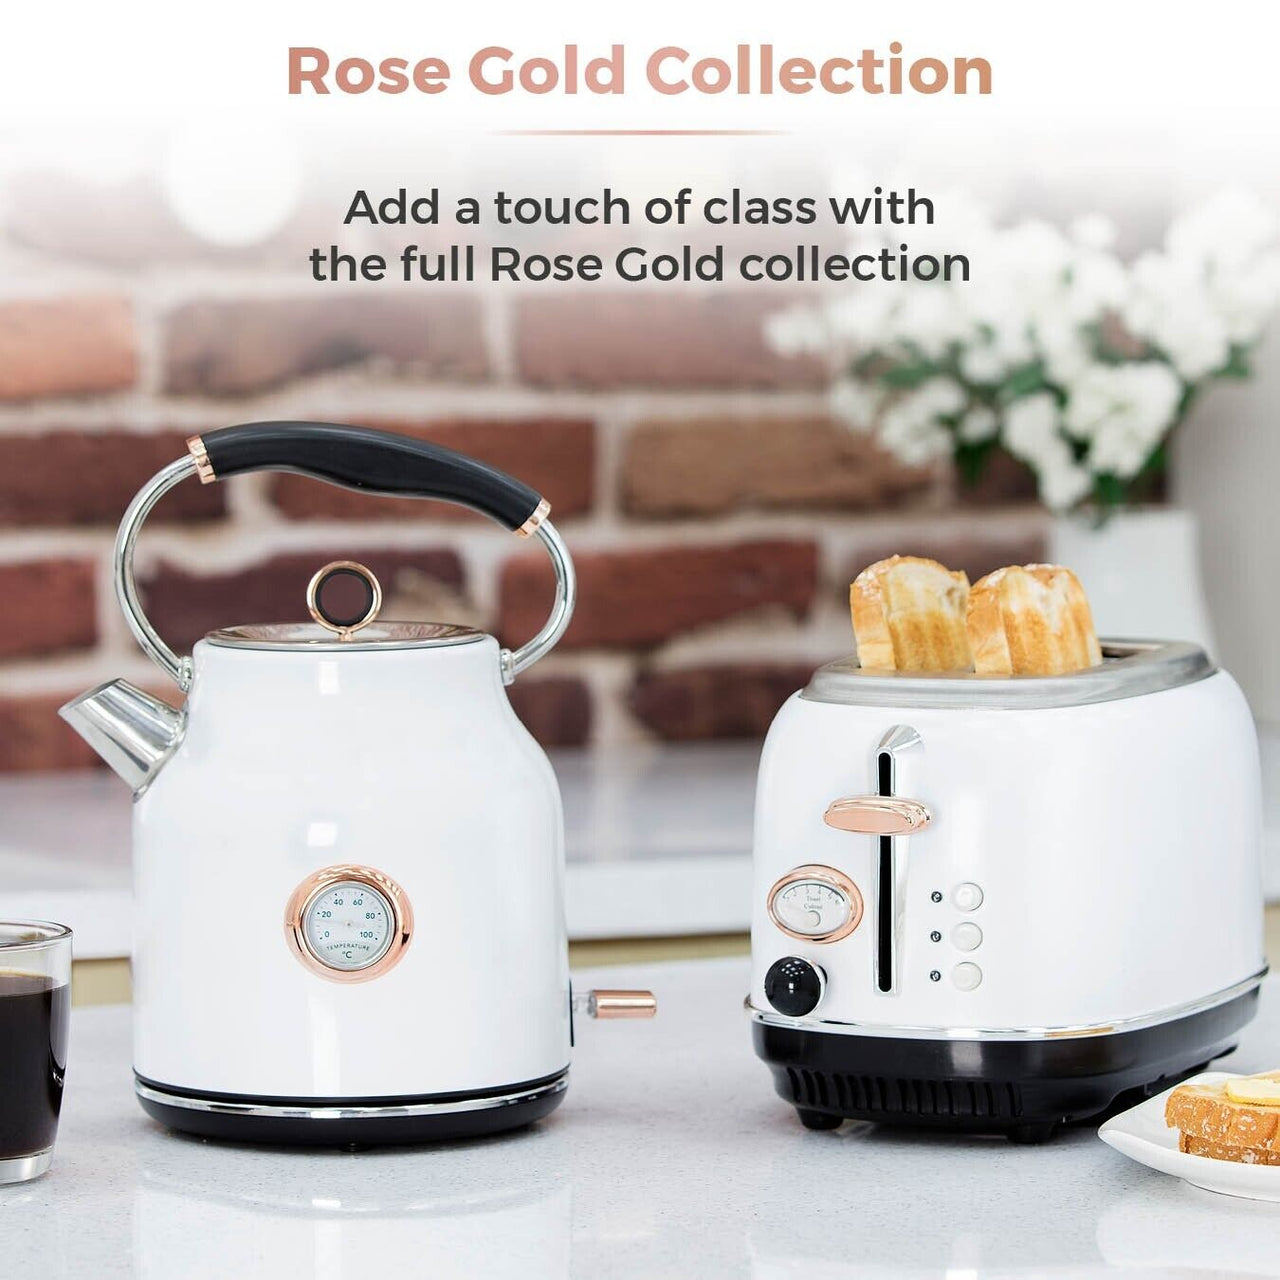 Tower Bottega 1.7L 3KW Traditional Kettle, 2 Slice Toaster, T24034WHT 700W 20L Microwave, Bread Bin, Canisters, Mug Tree, Towel Pole Matching Set in White & Rose Gold